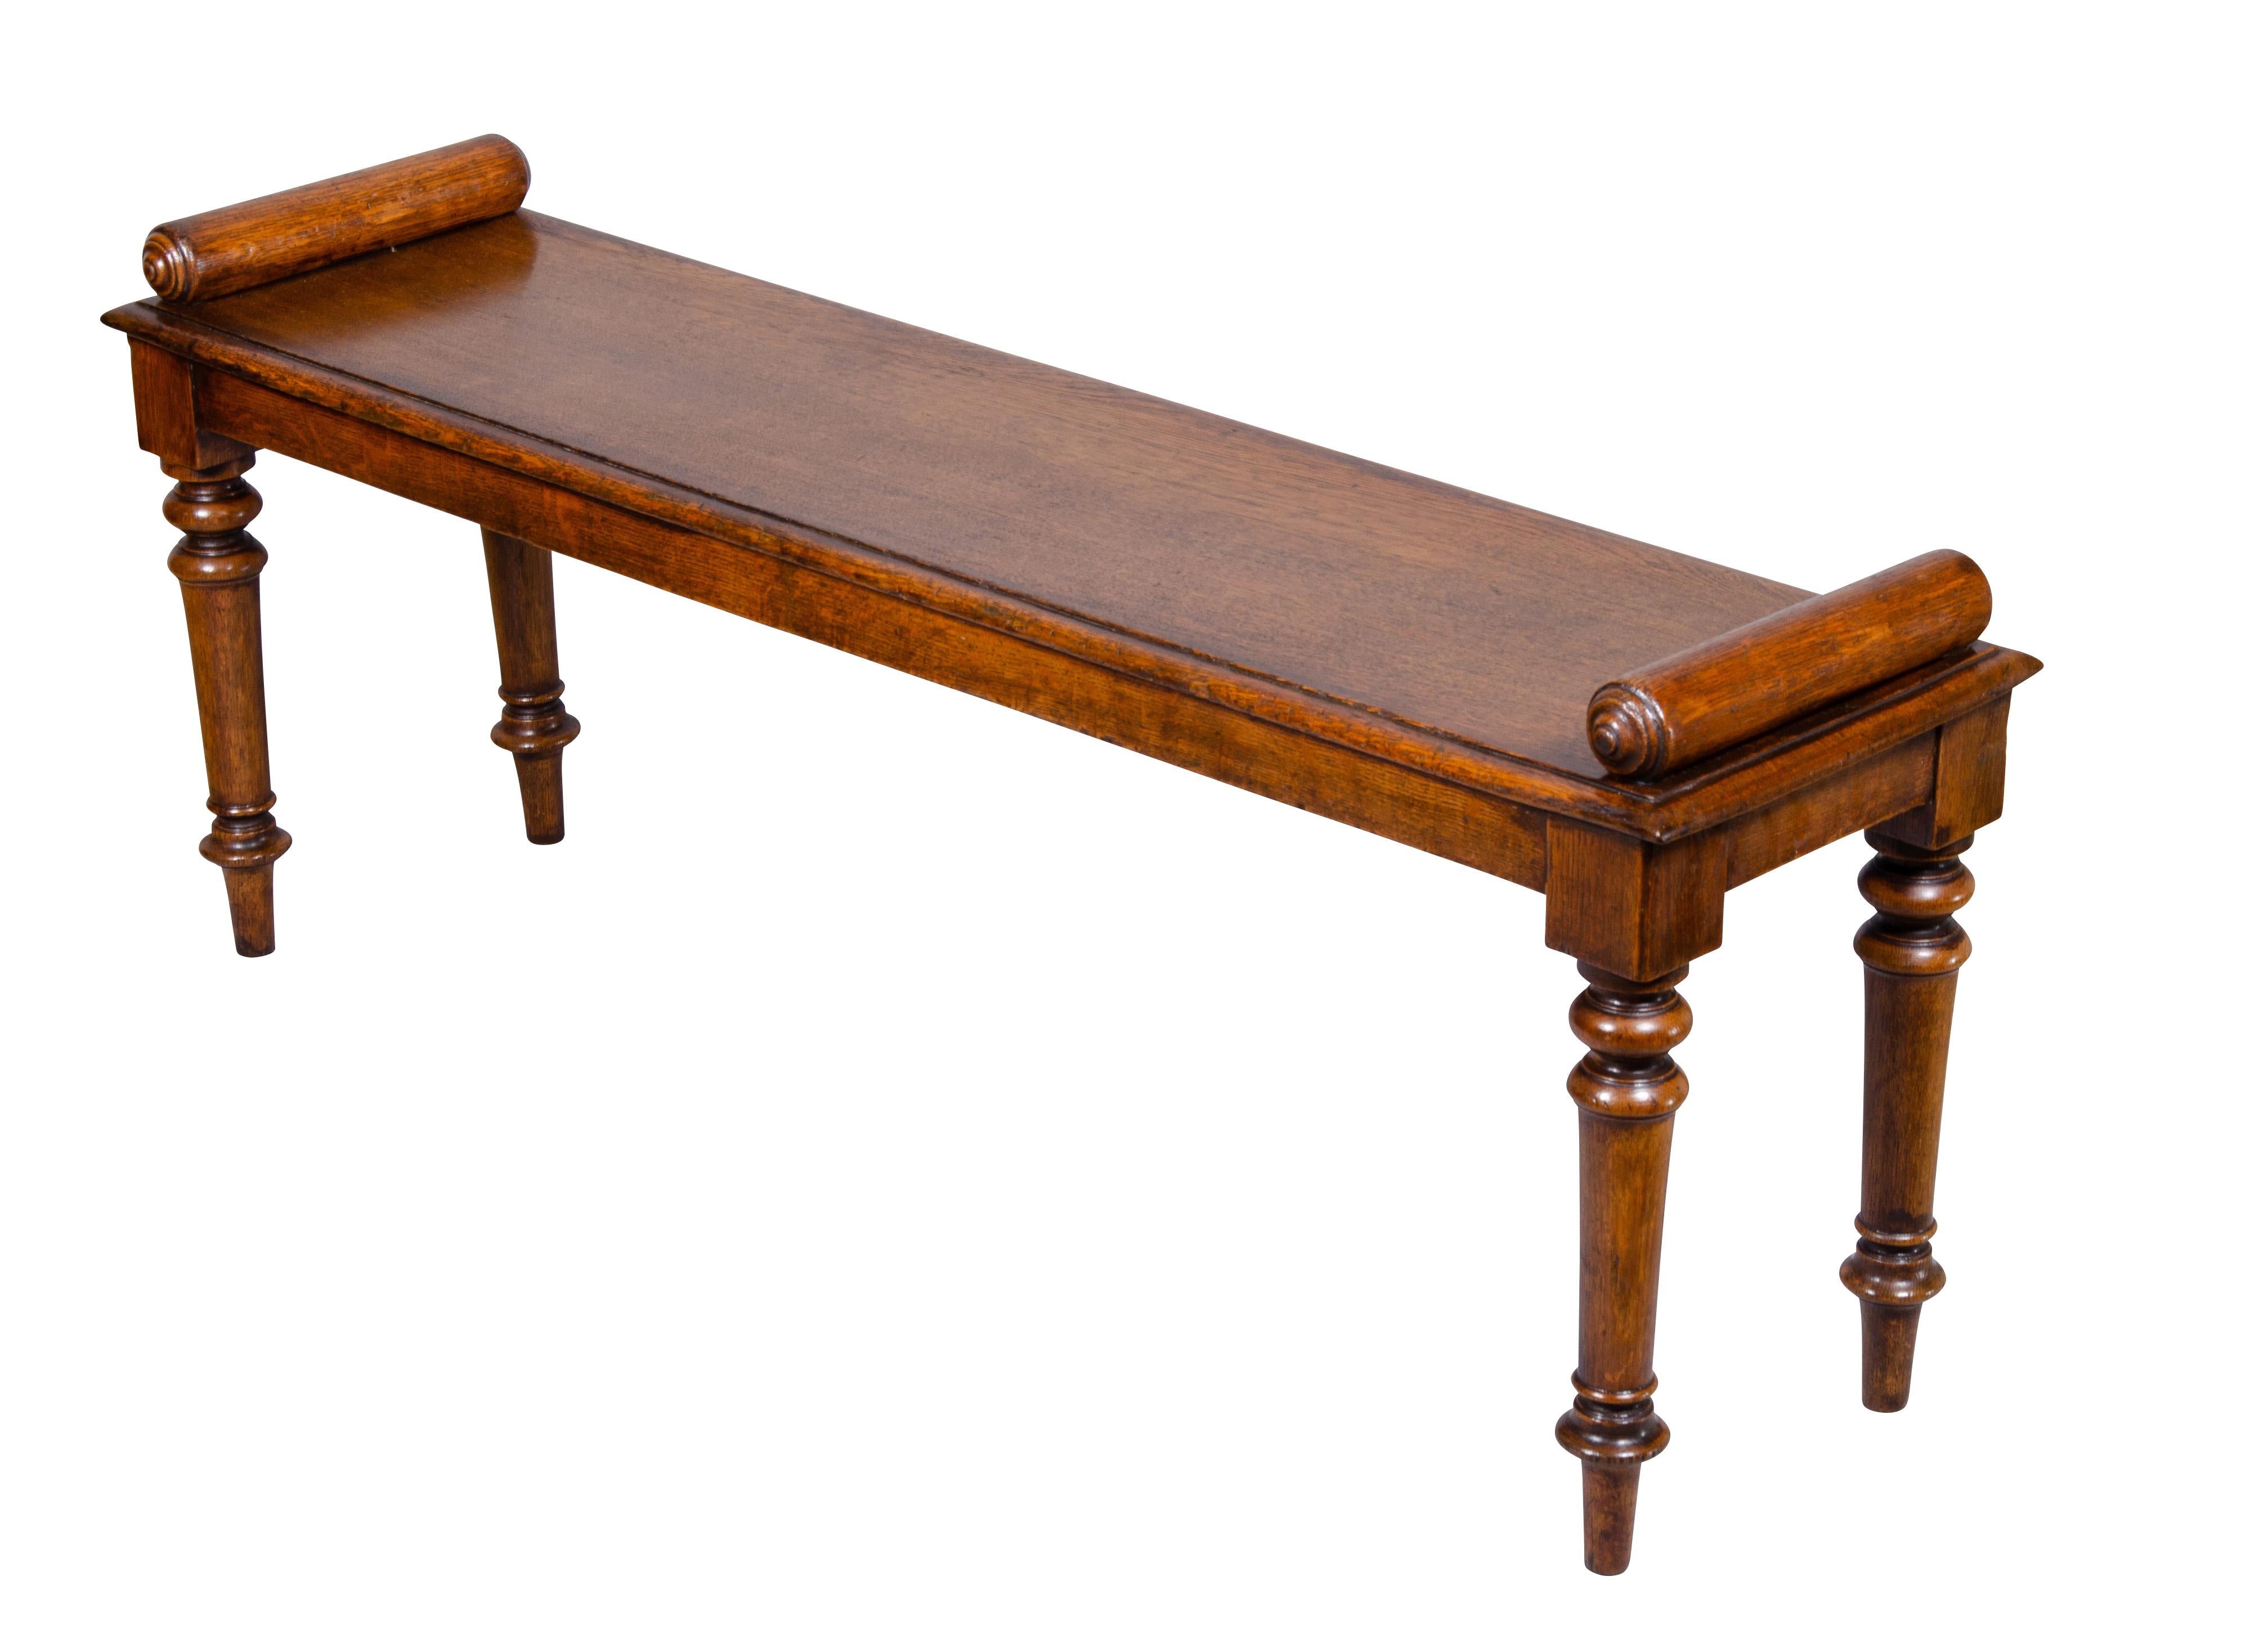 Late 19th Century Edwardian Oak Bench Attributed to Schoolbred